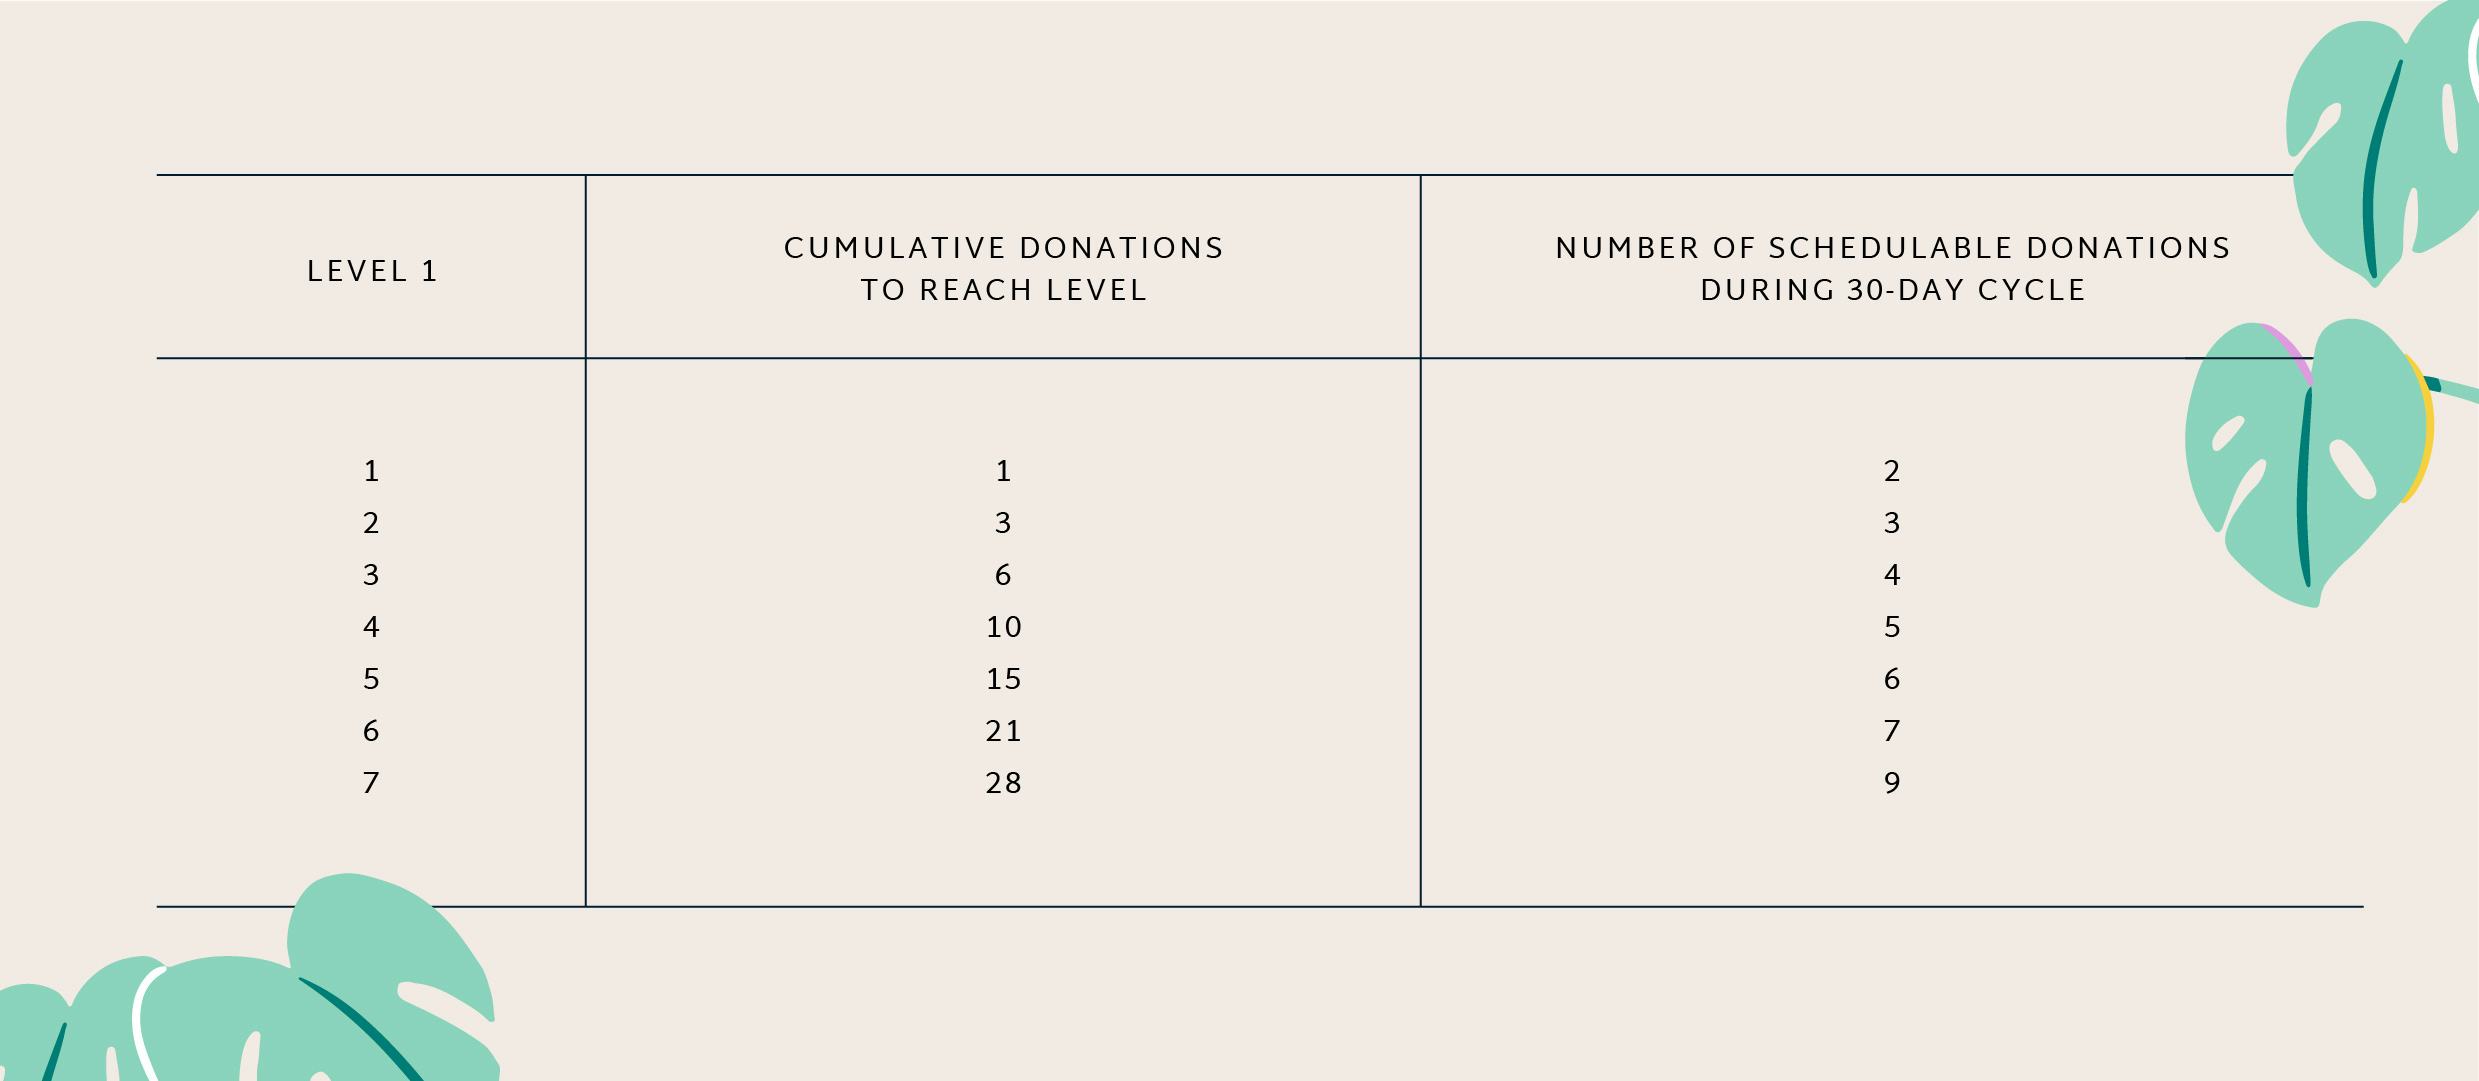 A chart showing how many donations are needed to reach each donation level and the number of schedulable donations during a cycle 